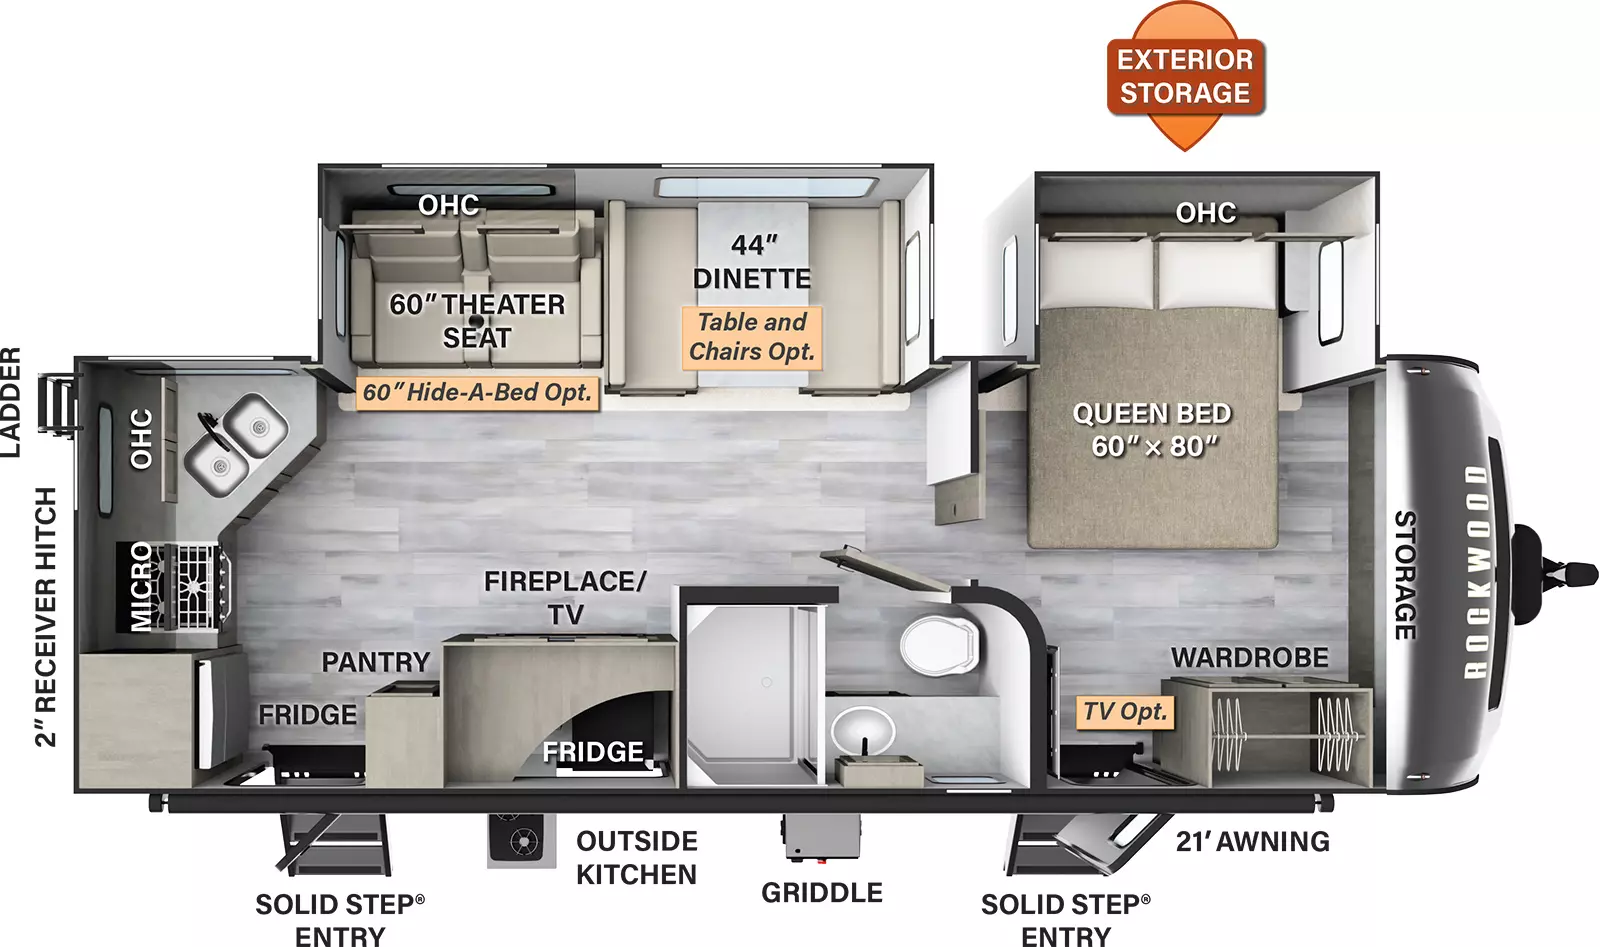 The 2614BS has two slide outs on the off-door side, along with two entry doors. Exterior features include a 21 foot awning, outside kitchen, exterior storage, griddle, rear ladder, and 2 inch receiver hitch. Interior layout from front to back: front bedroom with front storage, door side entry and wardrobe, and off-door side queen bed slide out with overhead cabinets (TV optional); side aisle bathroom on door side; off-door side slide out with dinette (table and chairs optional) and theater seating (hide a bed optional); door side entertainment center with TV and fireplace below, pantry and second entry; rear kitchen with double sink, microwave, stove, refrigerator, and overhead cabinets.